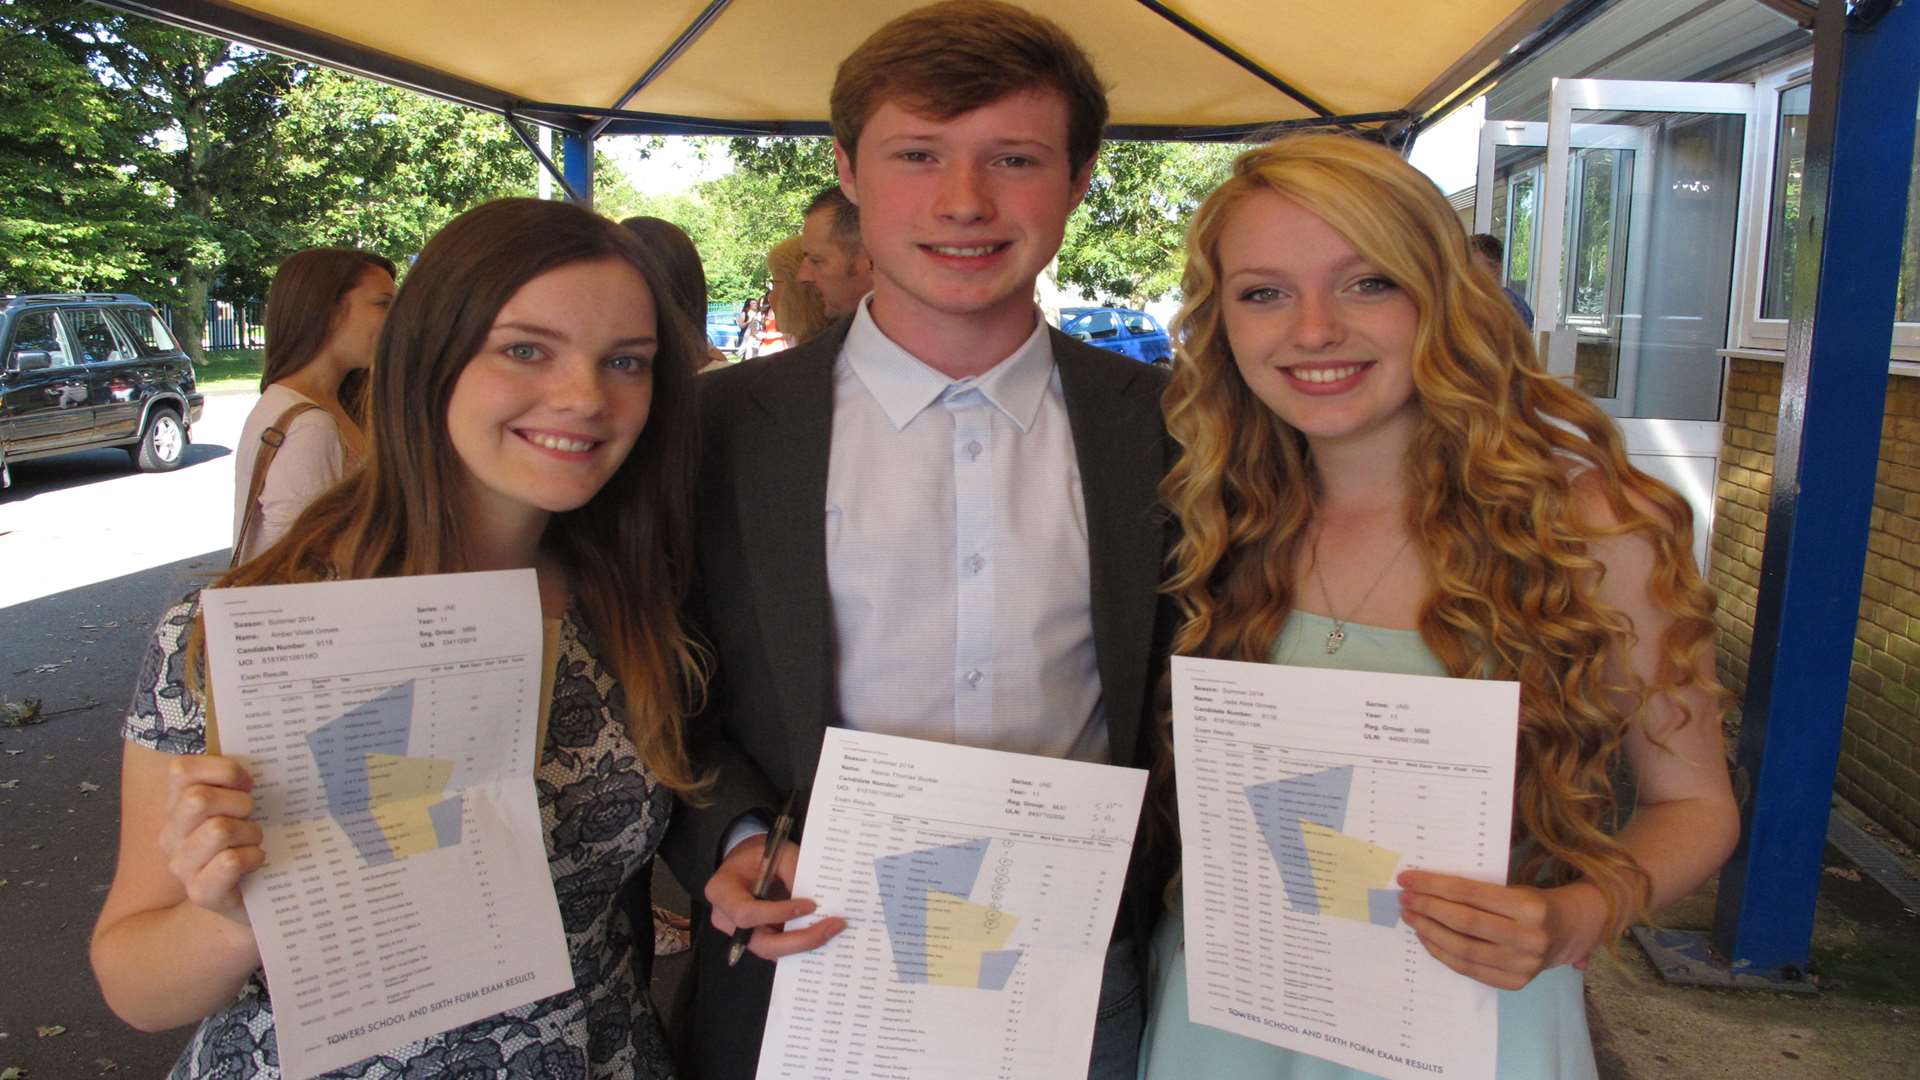 Twins Amber, left, and Jade Groves with Reece Buckle at Towers School in Ashford